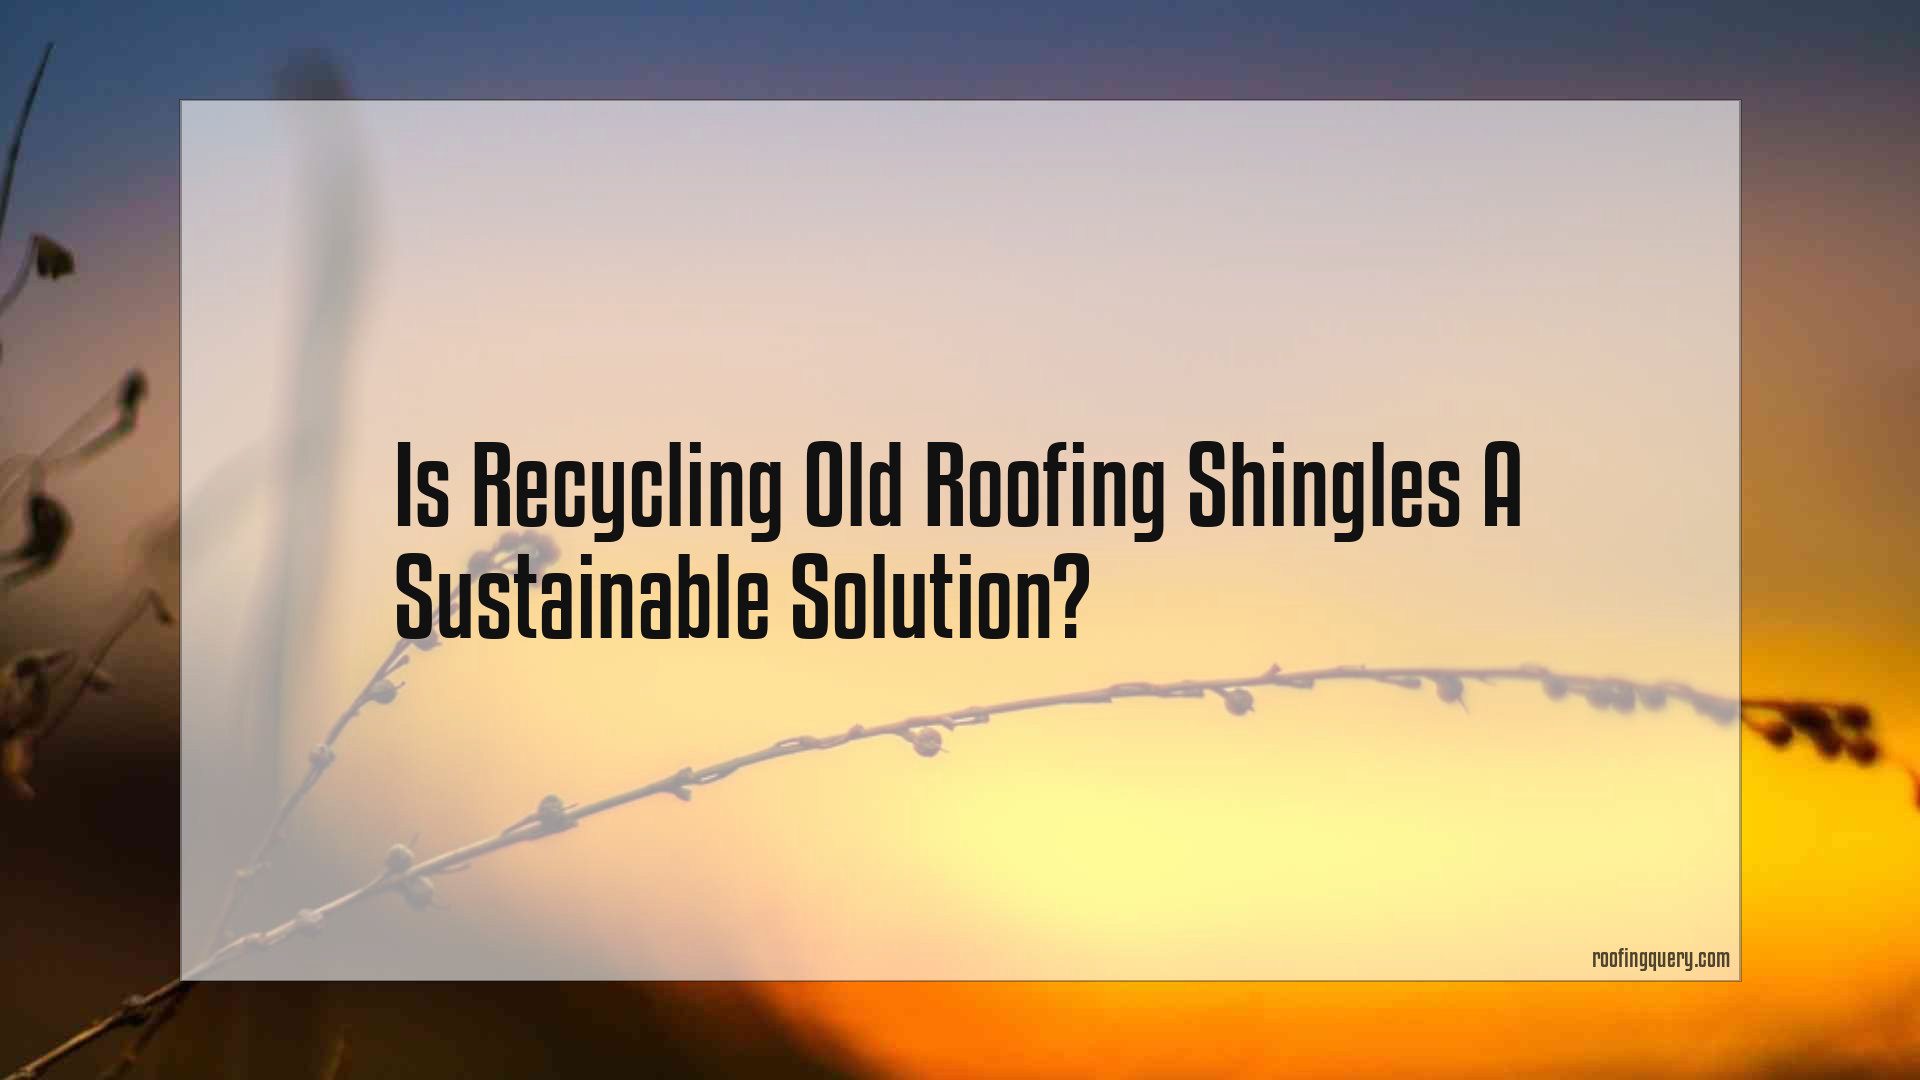 Is Recycling Old Roofing Shingles A Sustainable Solution